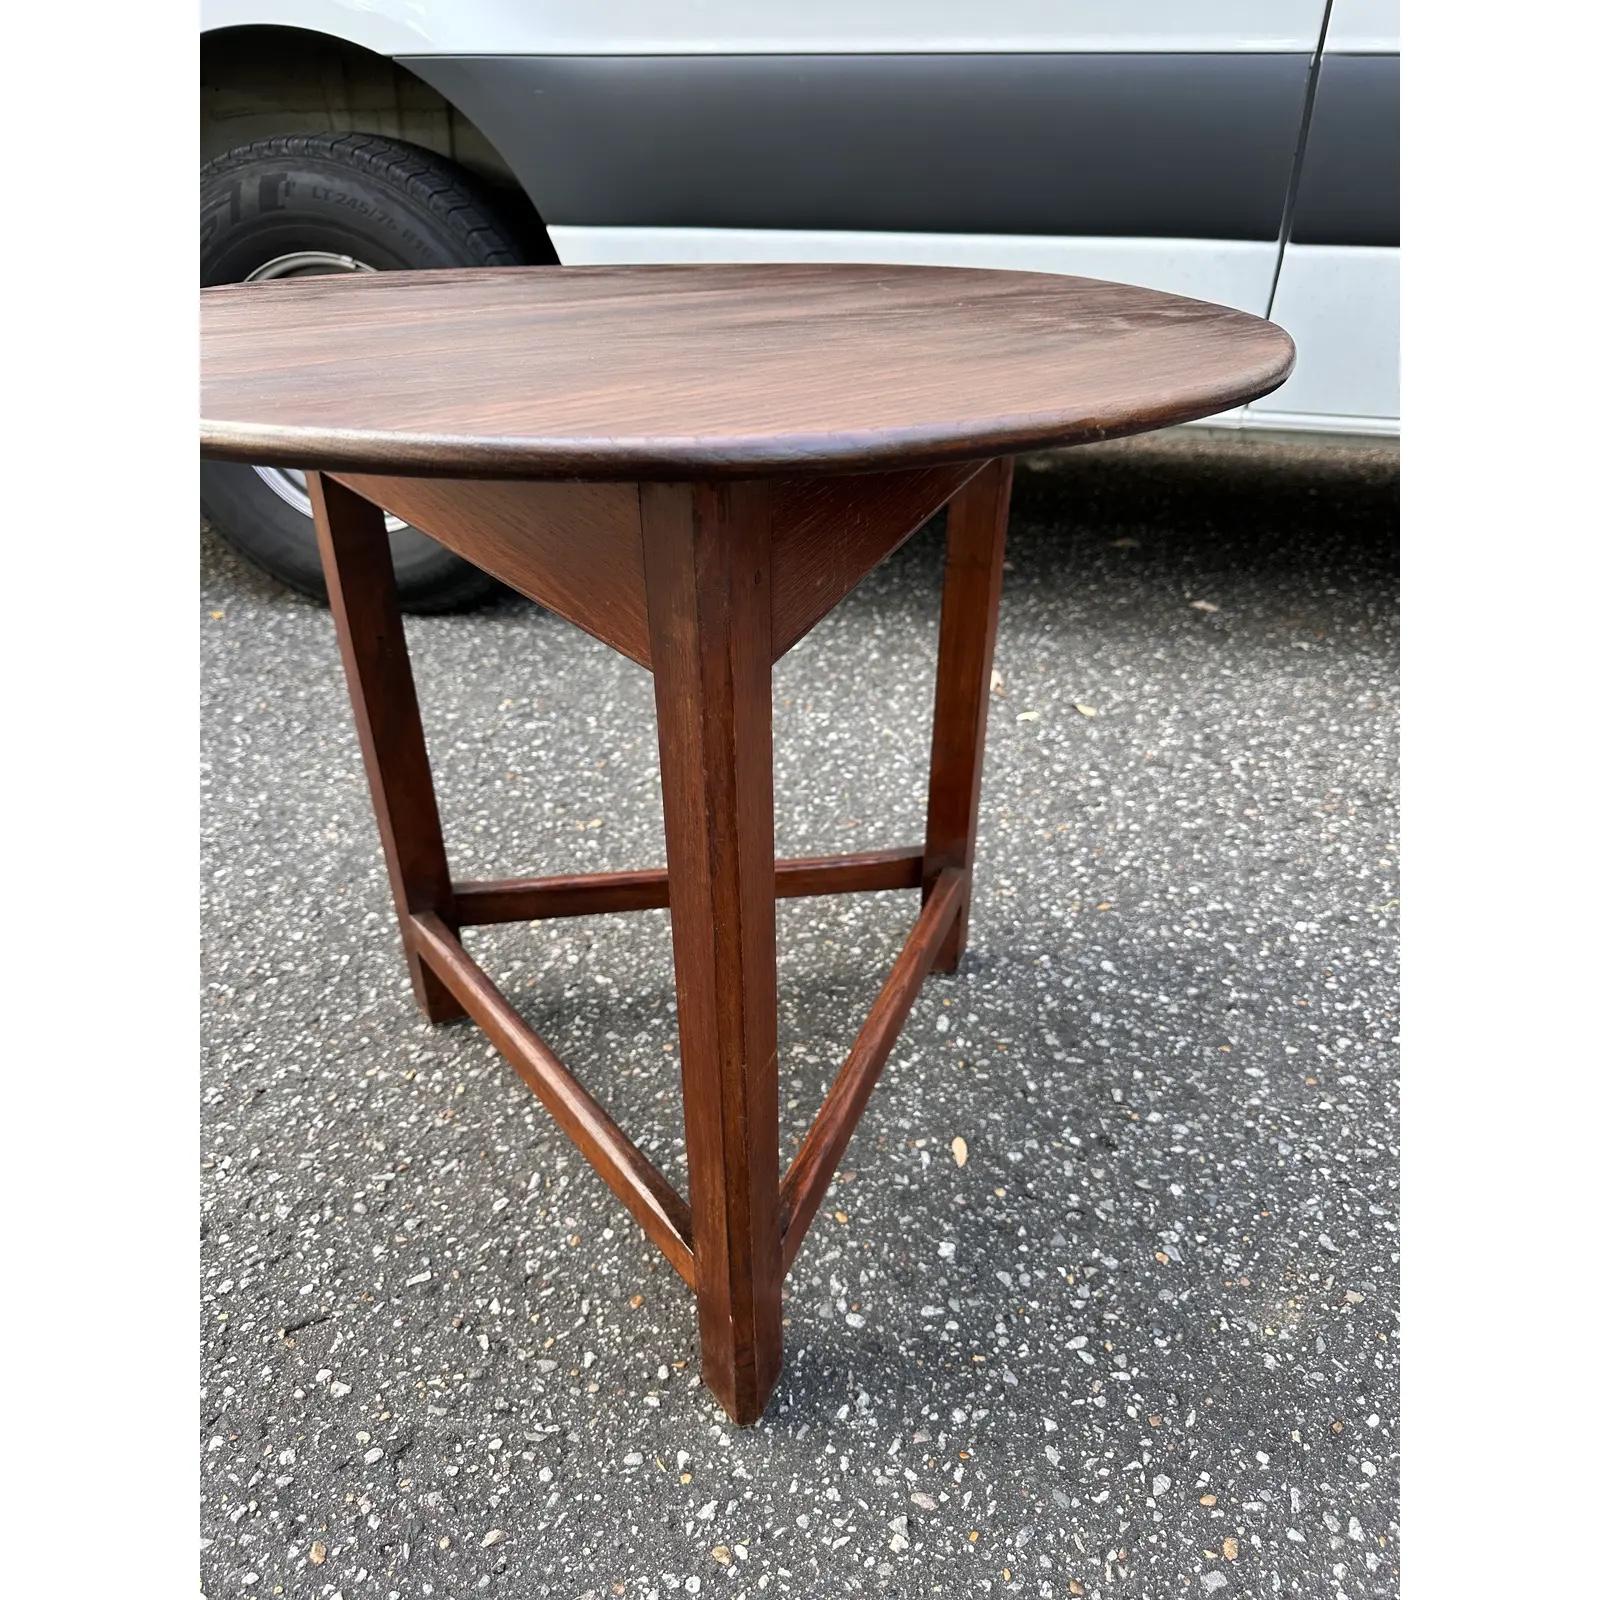 This is an adorable little English cricket table! It has such amazing patina the height makes it a perfect piece beside a chair are sofa. The rich deep wood tones of the table blend together beautifully and is intensified by this piece's lovely